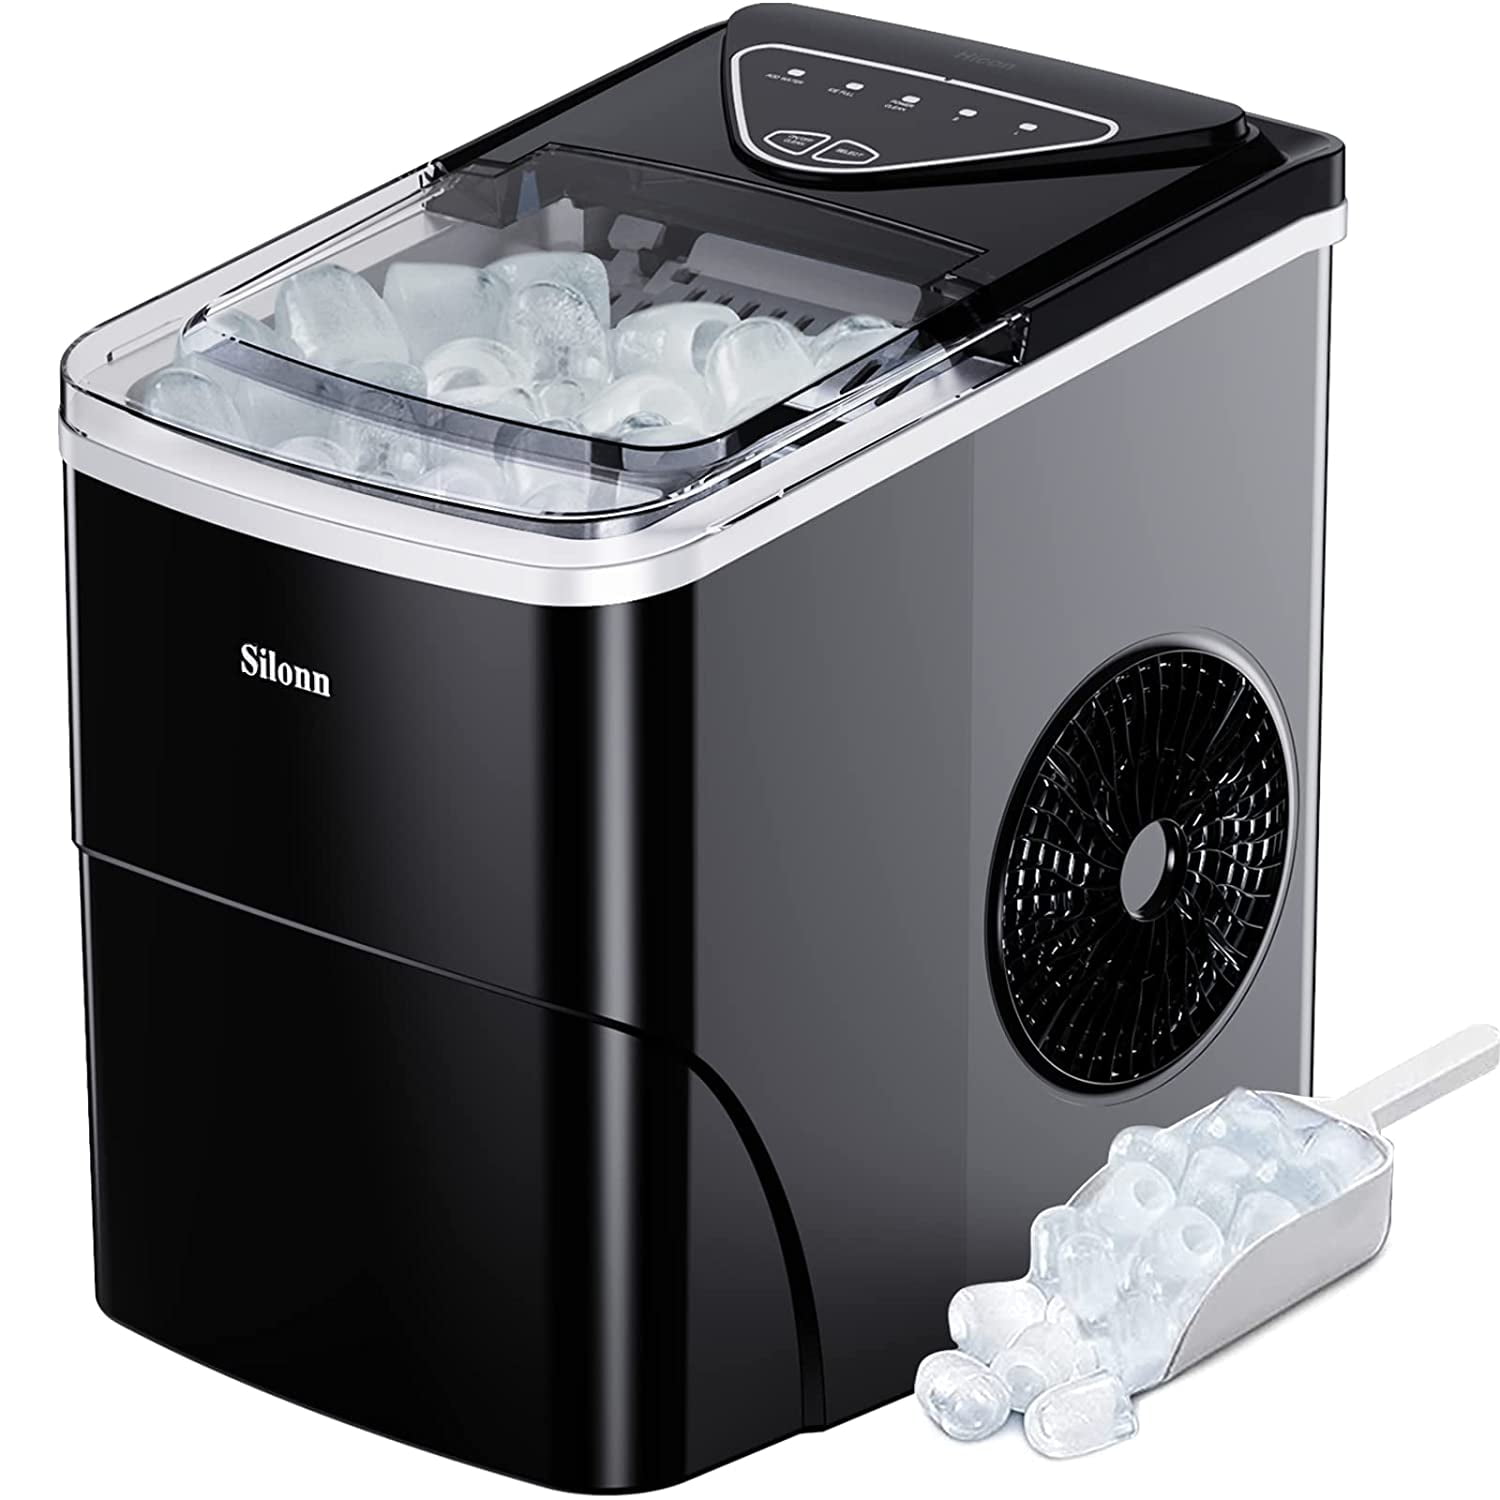 Silonn Ice Makers Countertop, 26Lbs/24H, Self-Cleaning Ice Machine, 9 Cubes Ready in 6 Mins, 2 Sizes of Bullet Ice for Home Kitchen Office Bar Party